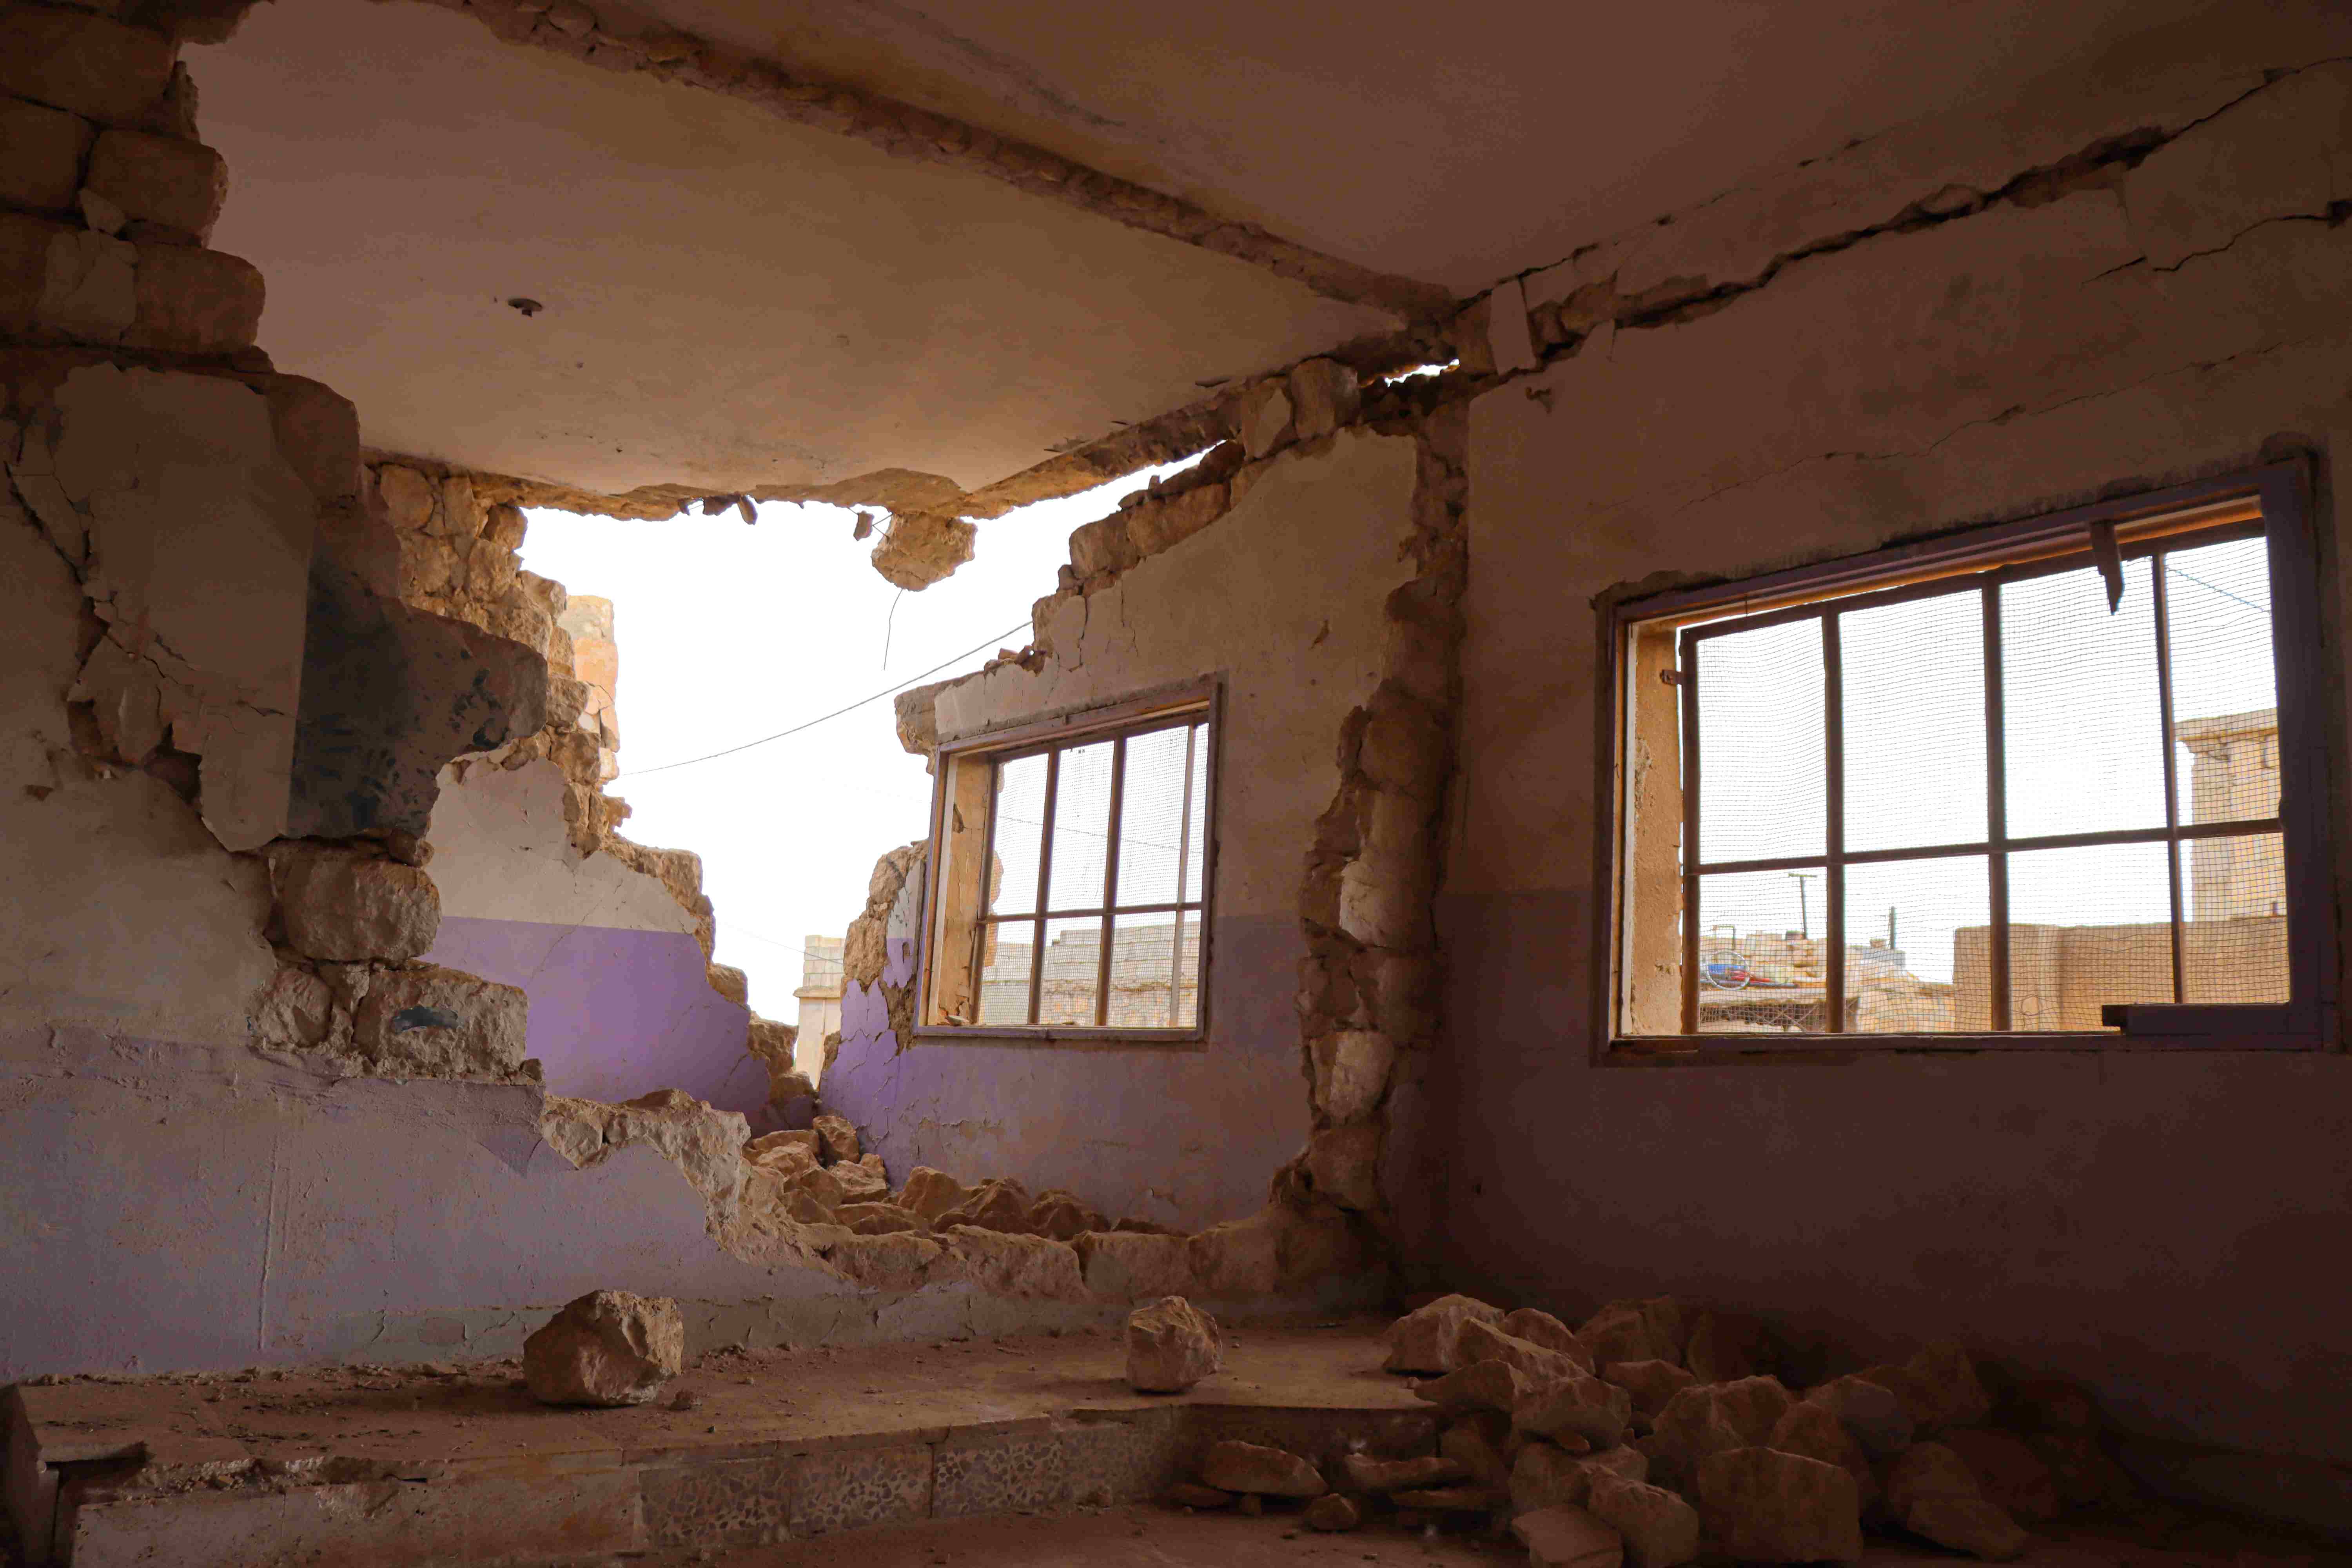 In Syria, a school is damaged by the earthquake. A picture from the inside of the school shows a crumbled interior and exterior wall. 